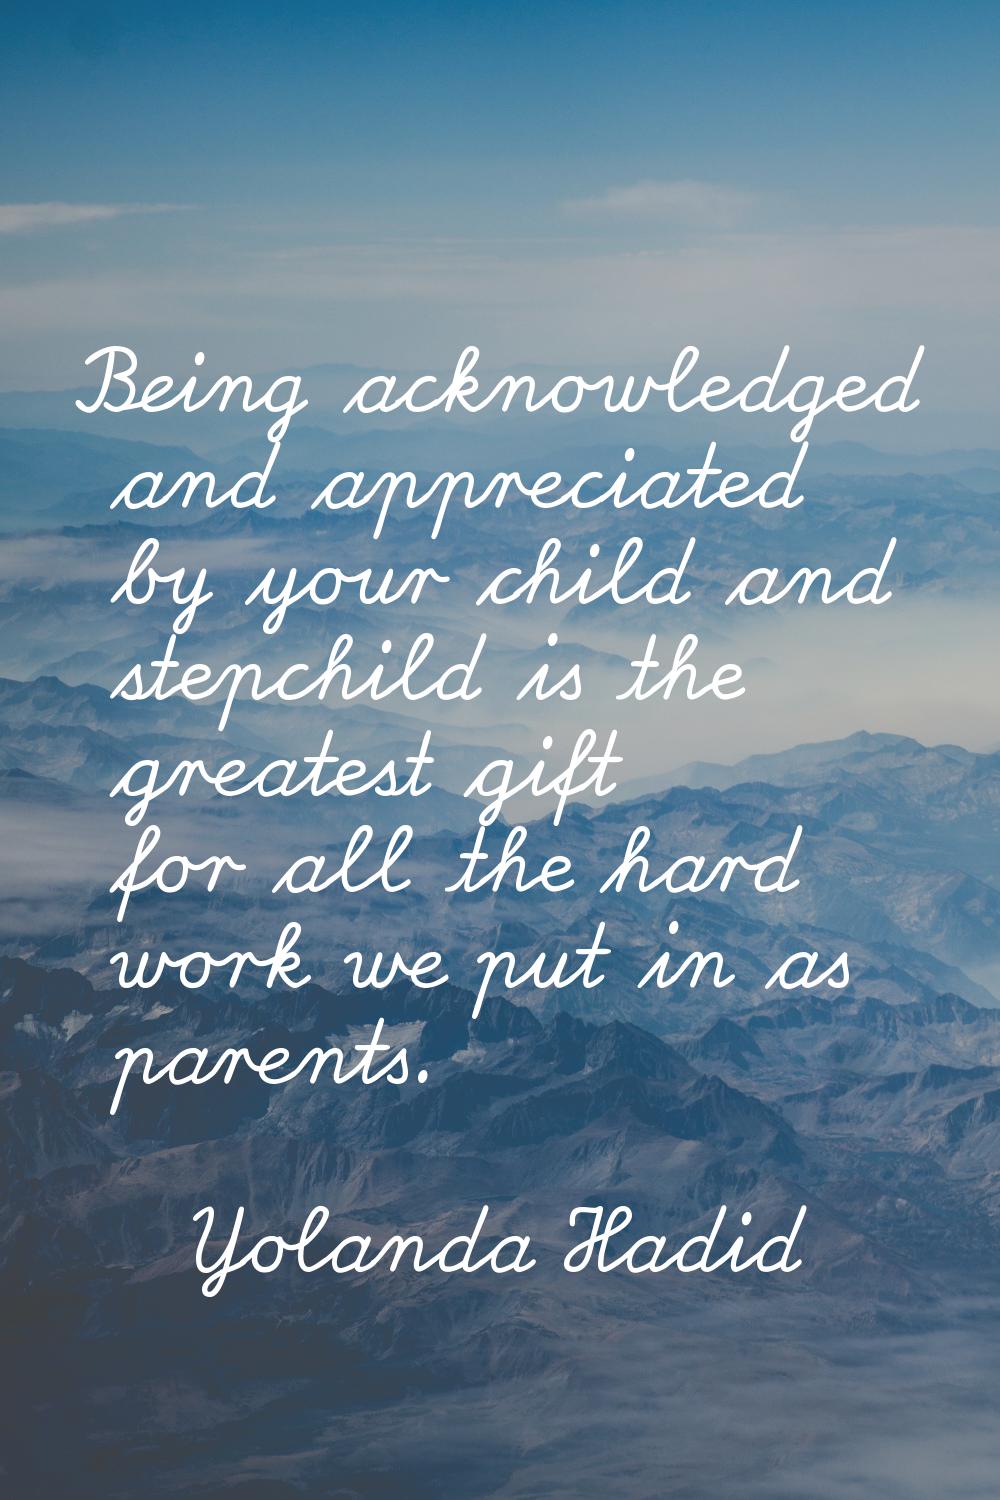 Being acknowledged and appreciated by your child and stepchild is the greatest gift for all the har